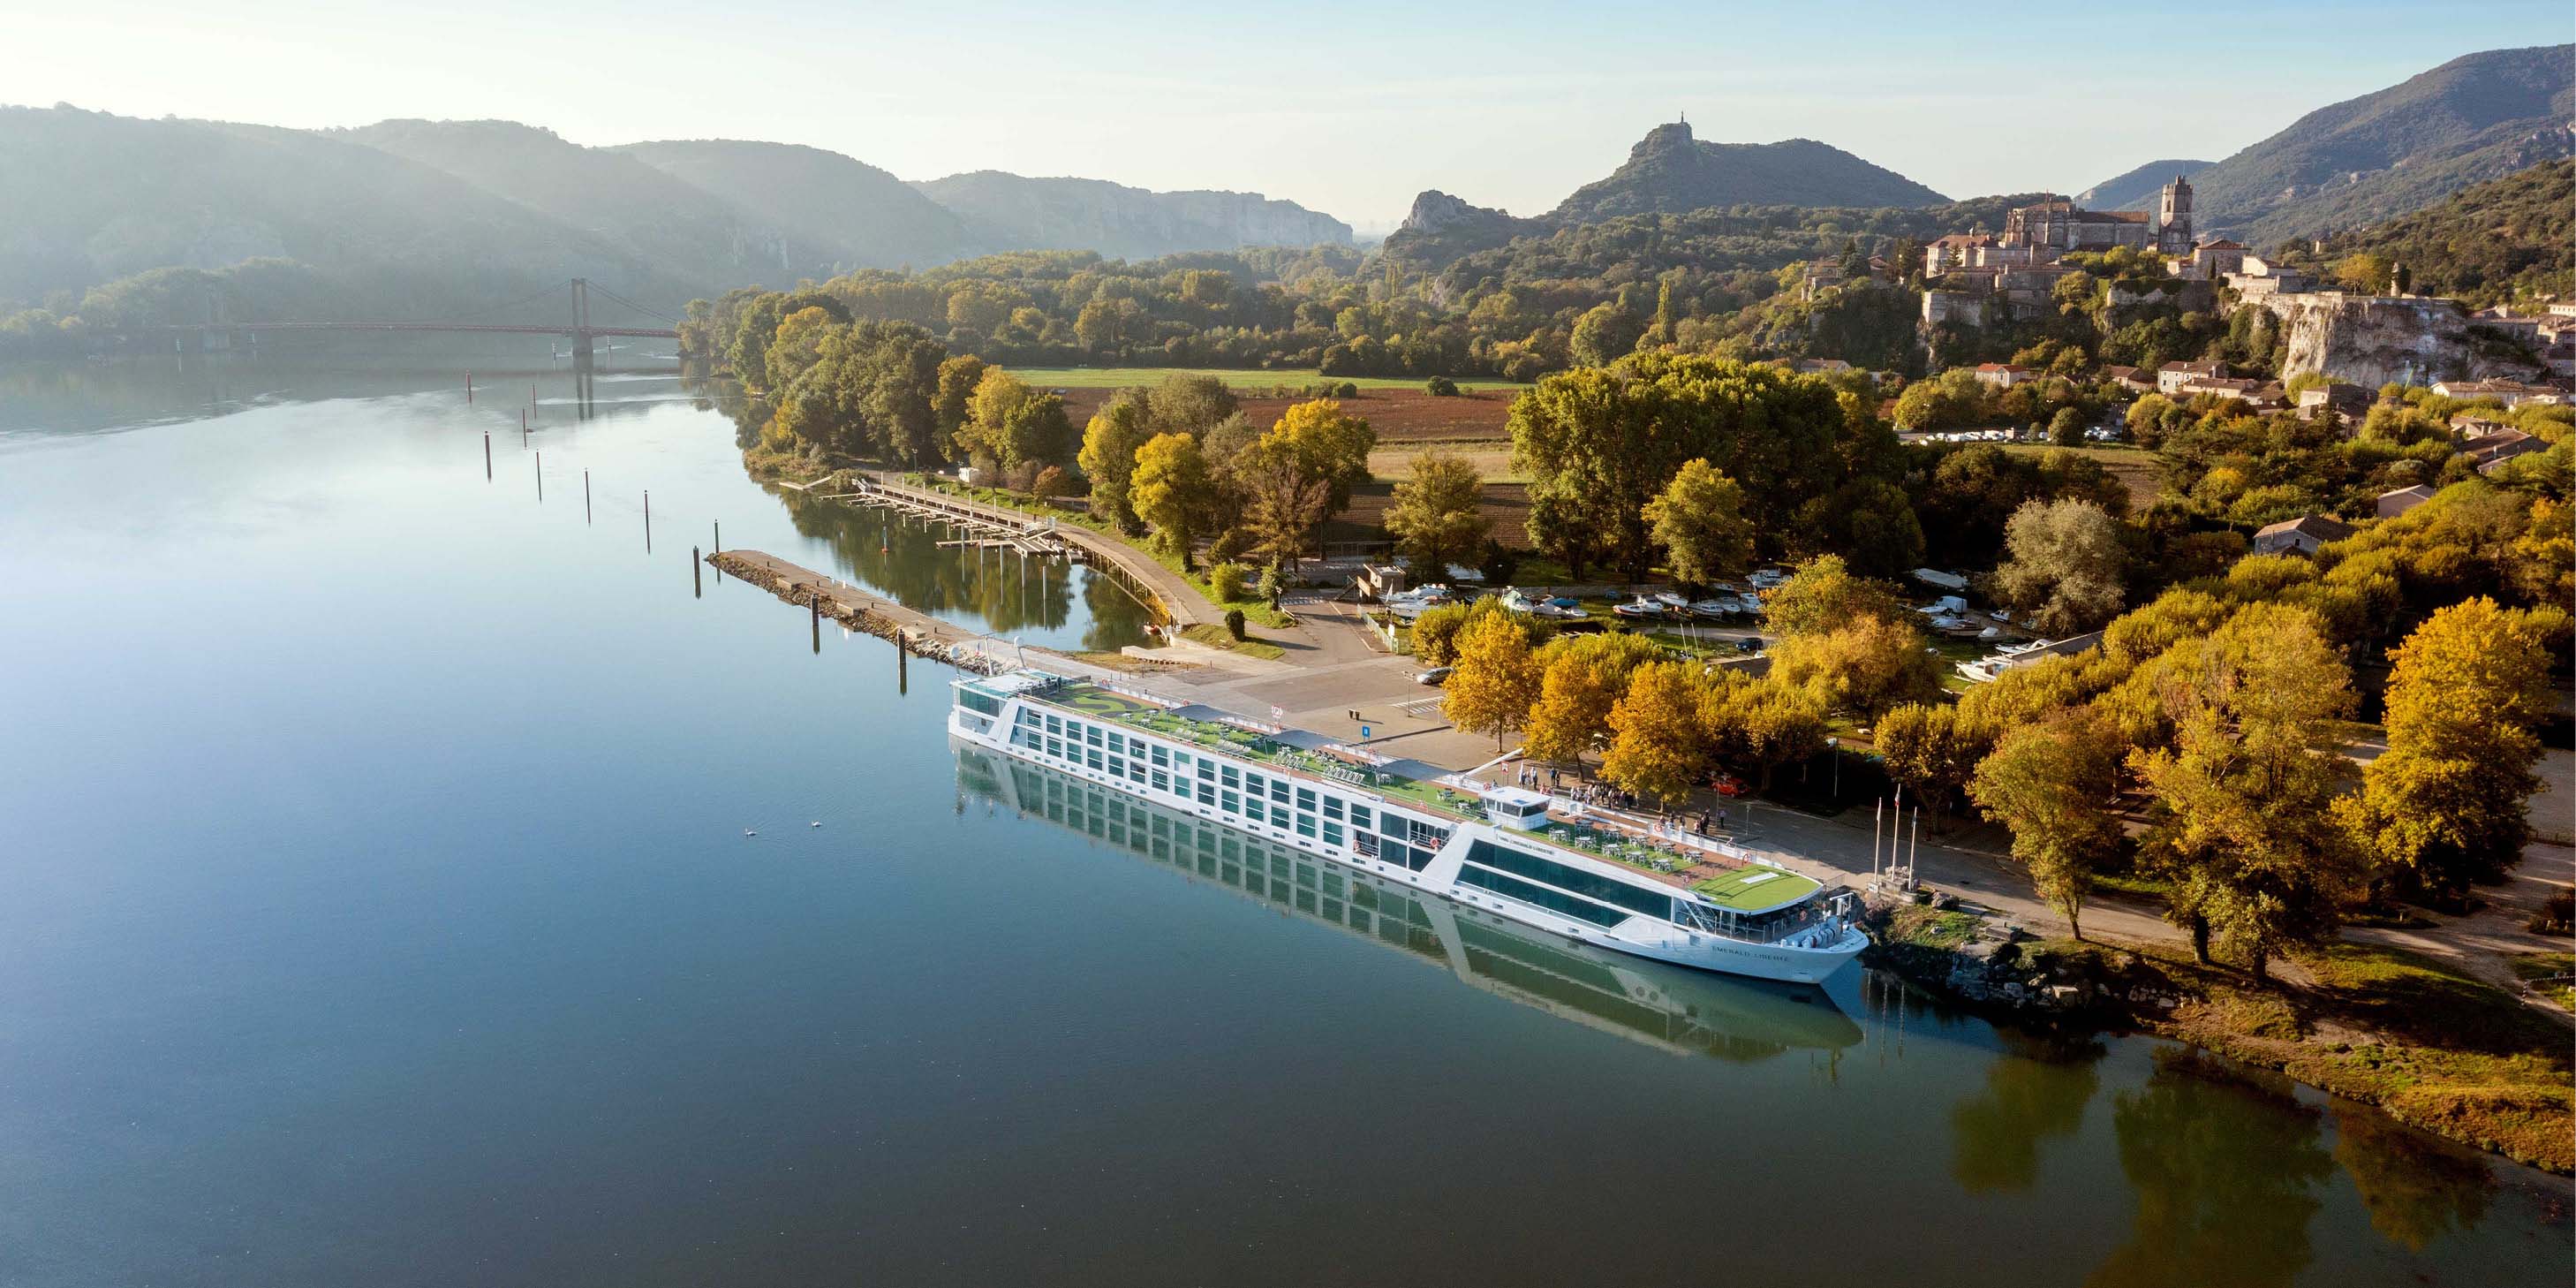 An Emerald Cruises Star-Ship is docked in Viviers, France, Green hills and a castle are seen in the background.